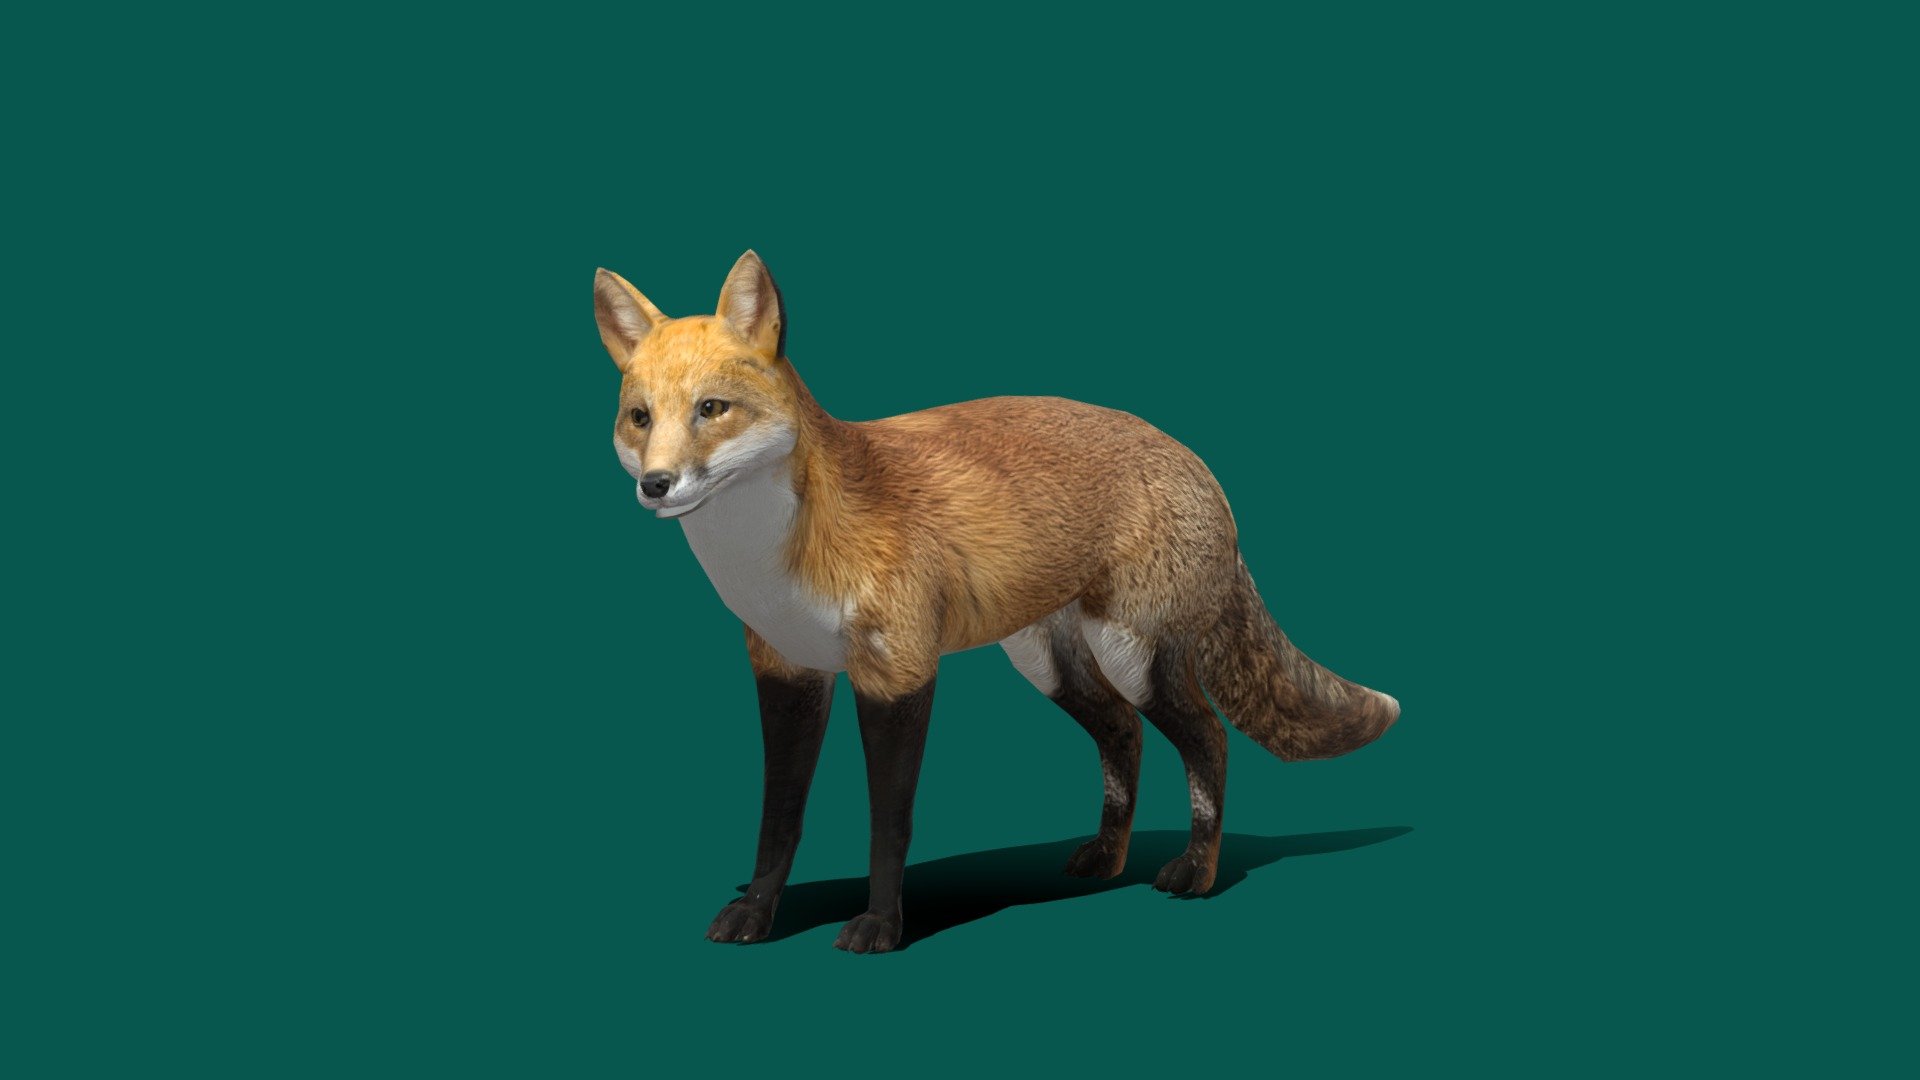 Vulpes vulpes

Game Ready

Lowpoly 

Red Fox  Animals

8 Animations

4K PBR Textures Material

FBX  File  (Unreal Unity Compatible) 

Blend File 

USDZ File (AR Ready). Real Scale Dimension

Textures Files

GLB File

Gltf File ( Spark AR, Lens Studio , Effector , Spline, Play Canvas ) Compatible

Ref Image 
 - Red Fox - Buy Royalty Free 3D model by Nyilonelycompany 3d model